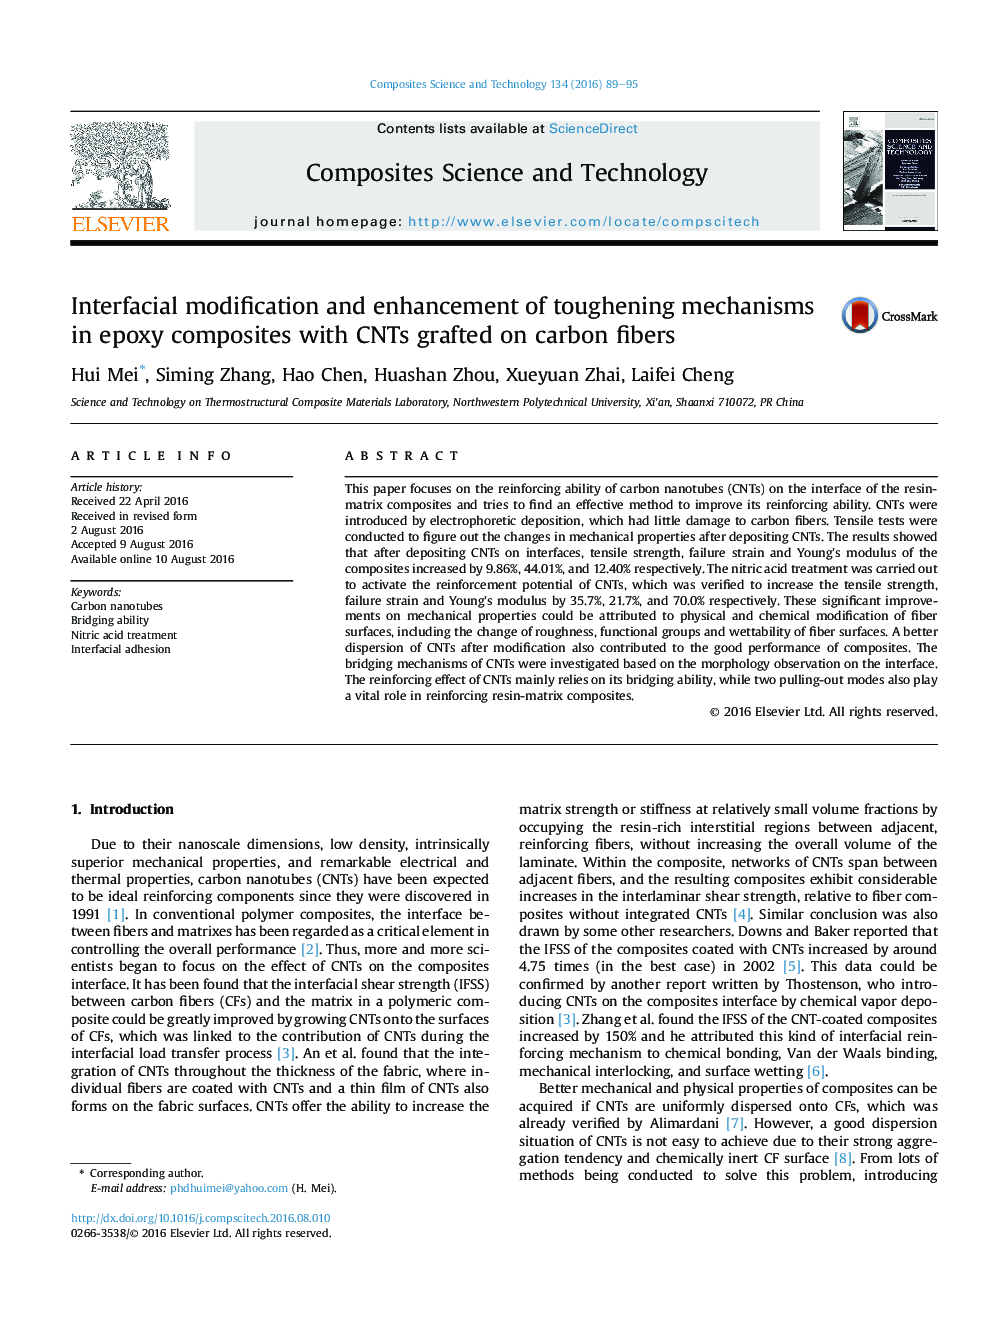 Interfacial modification and enhancement of toughening mechanisms in epoxy composites with CNTs grafted on carbon fibers